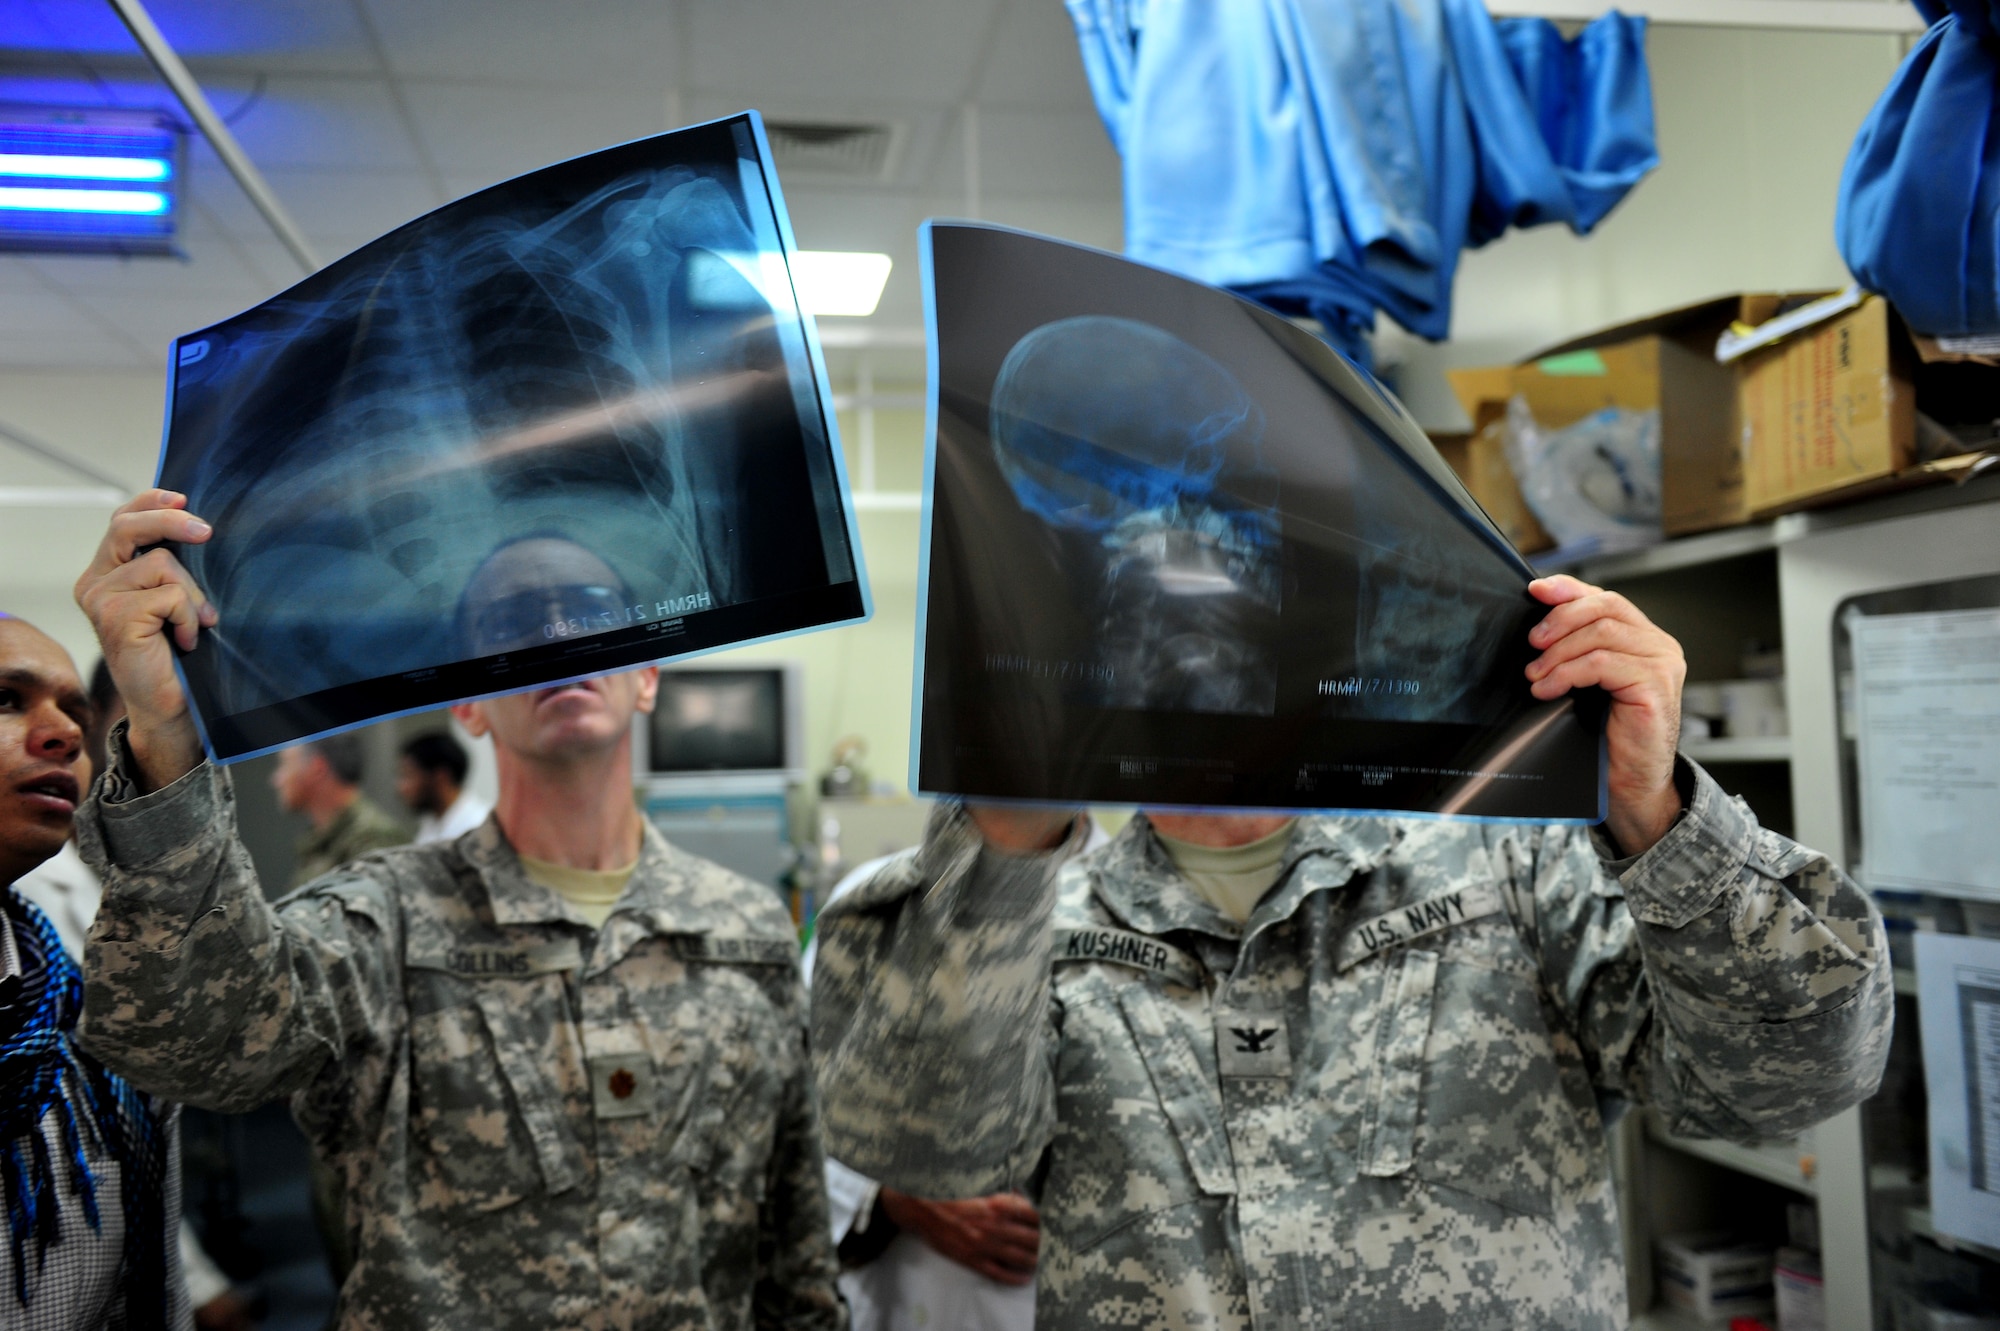 Maj. Jeffrey Collins compares X-rays, with Navy Capt. Christopher Kushner, at Herat's Afghanistan National Army Hospital intensive care unit Oct. 10, 2011. Collins is part of the Special Operations Surgical Team, deployed from Hurlburt Field, Fla. The SOST team provides medicine to disadvantaged people, provides direct patient care, and builds relationships with local doctors. (U.S. Air Force Photo/Senior Airman Tyler Placie)